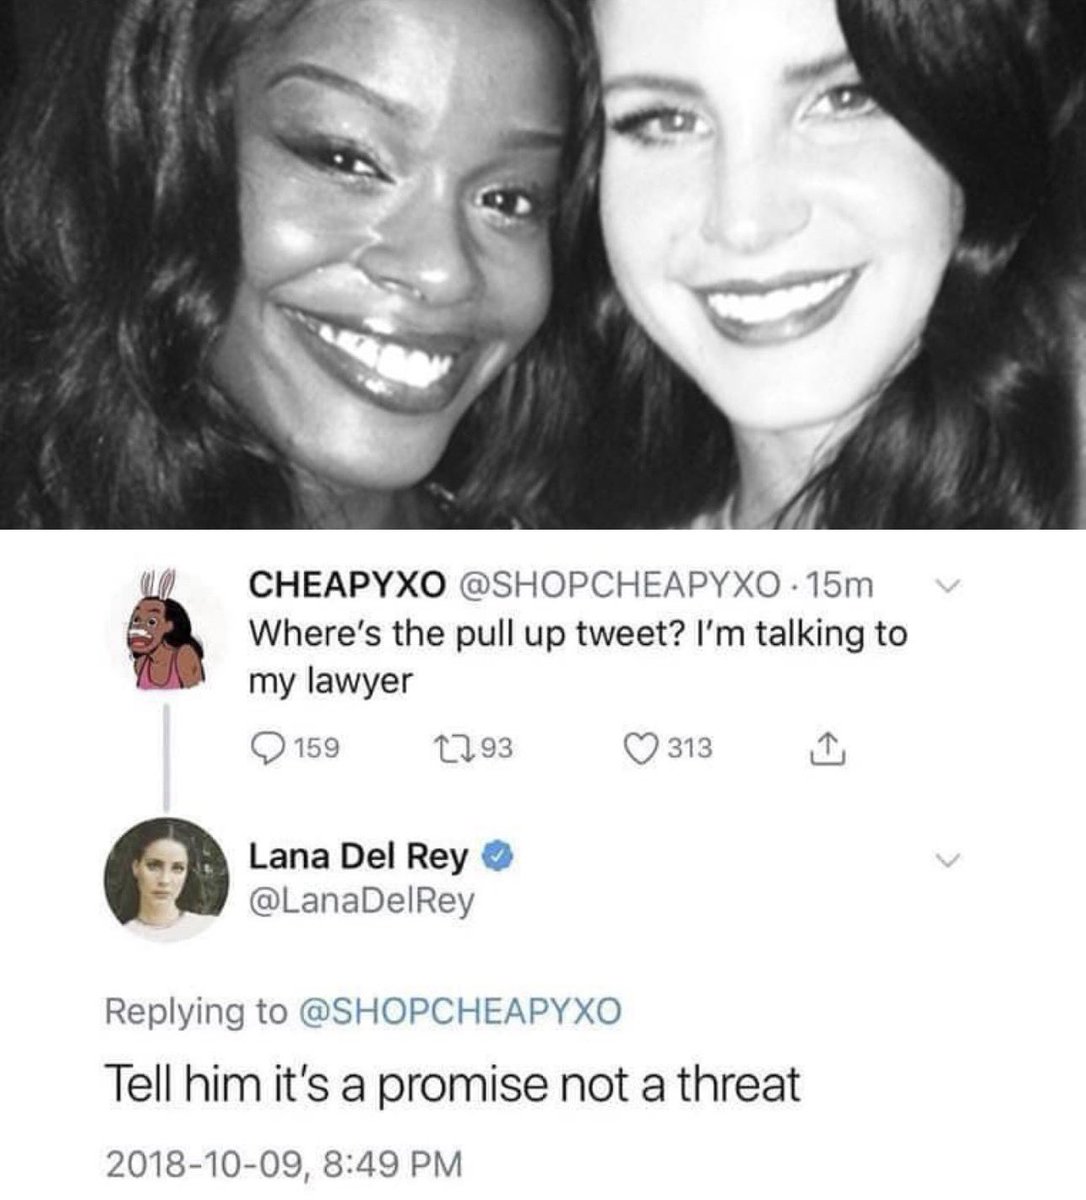 🚨 The College Board has confirmed that the infamous feud between Lana Del Rey and Azealia Banks will be a prominent topic in the 2030 APUSH exam.